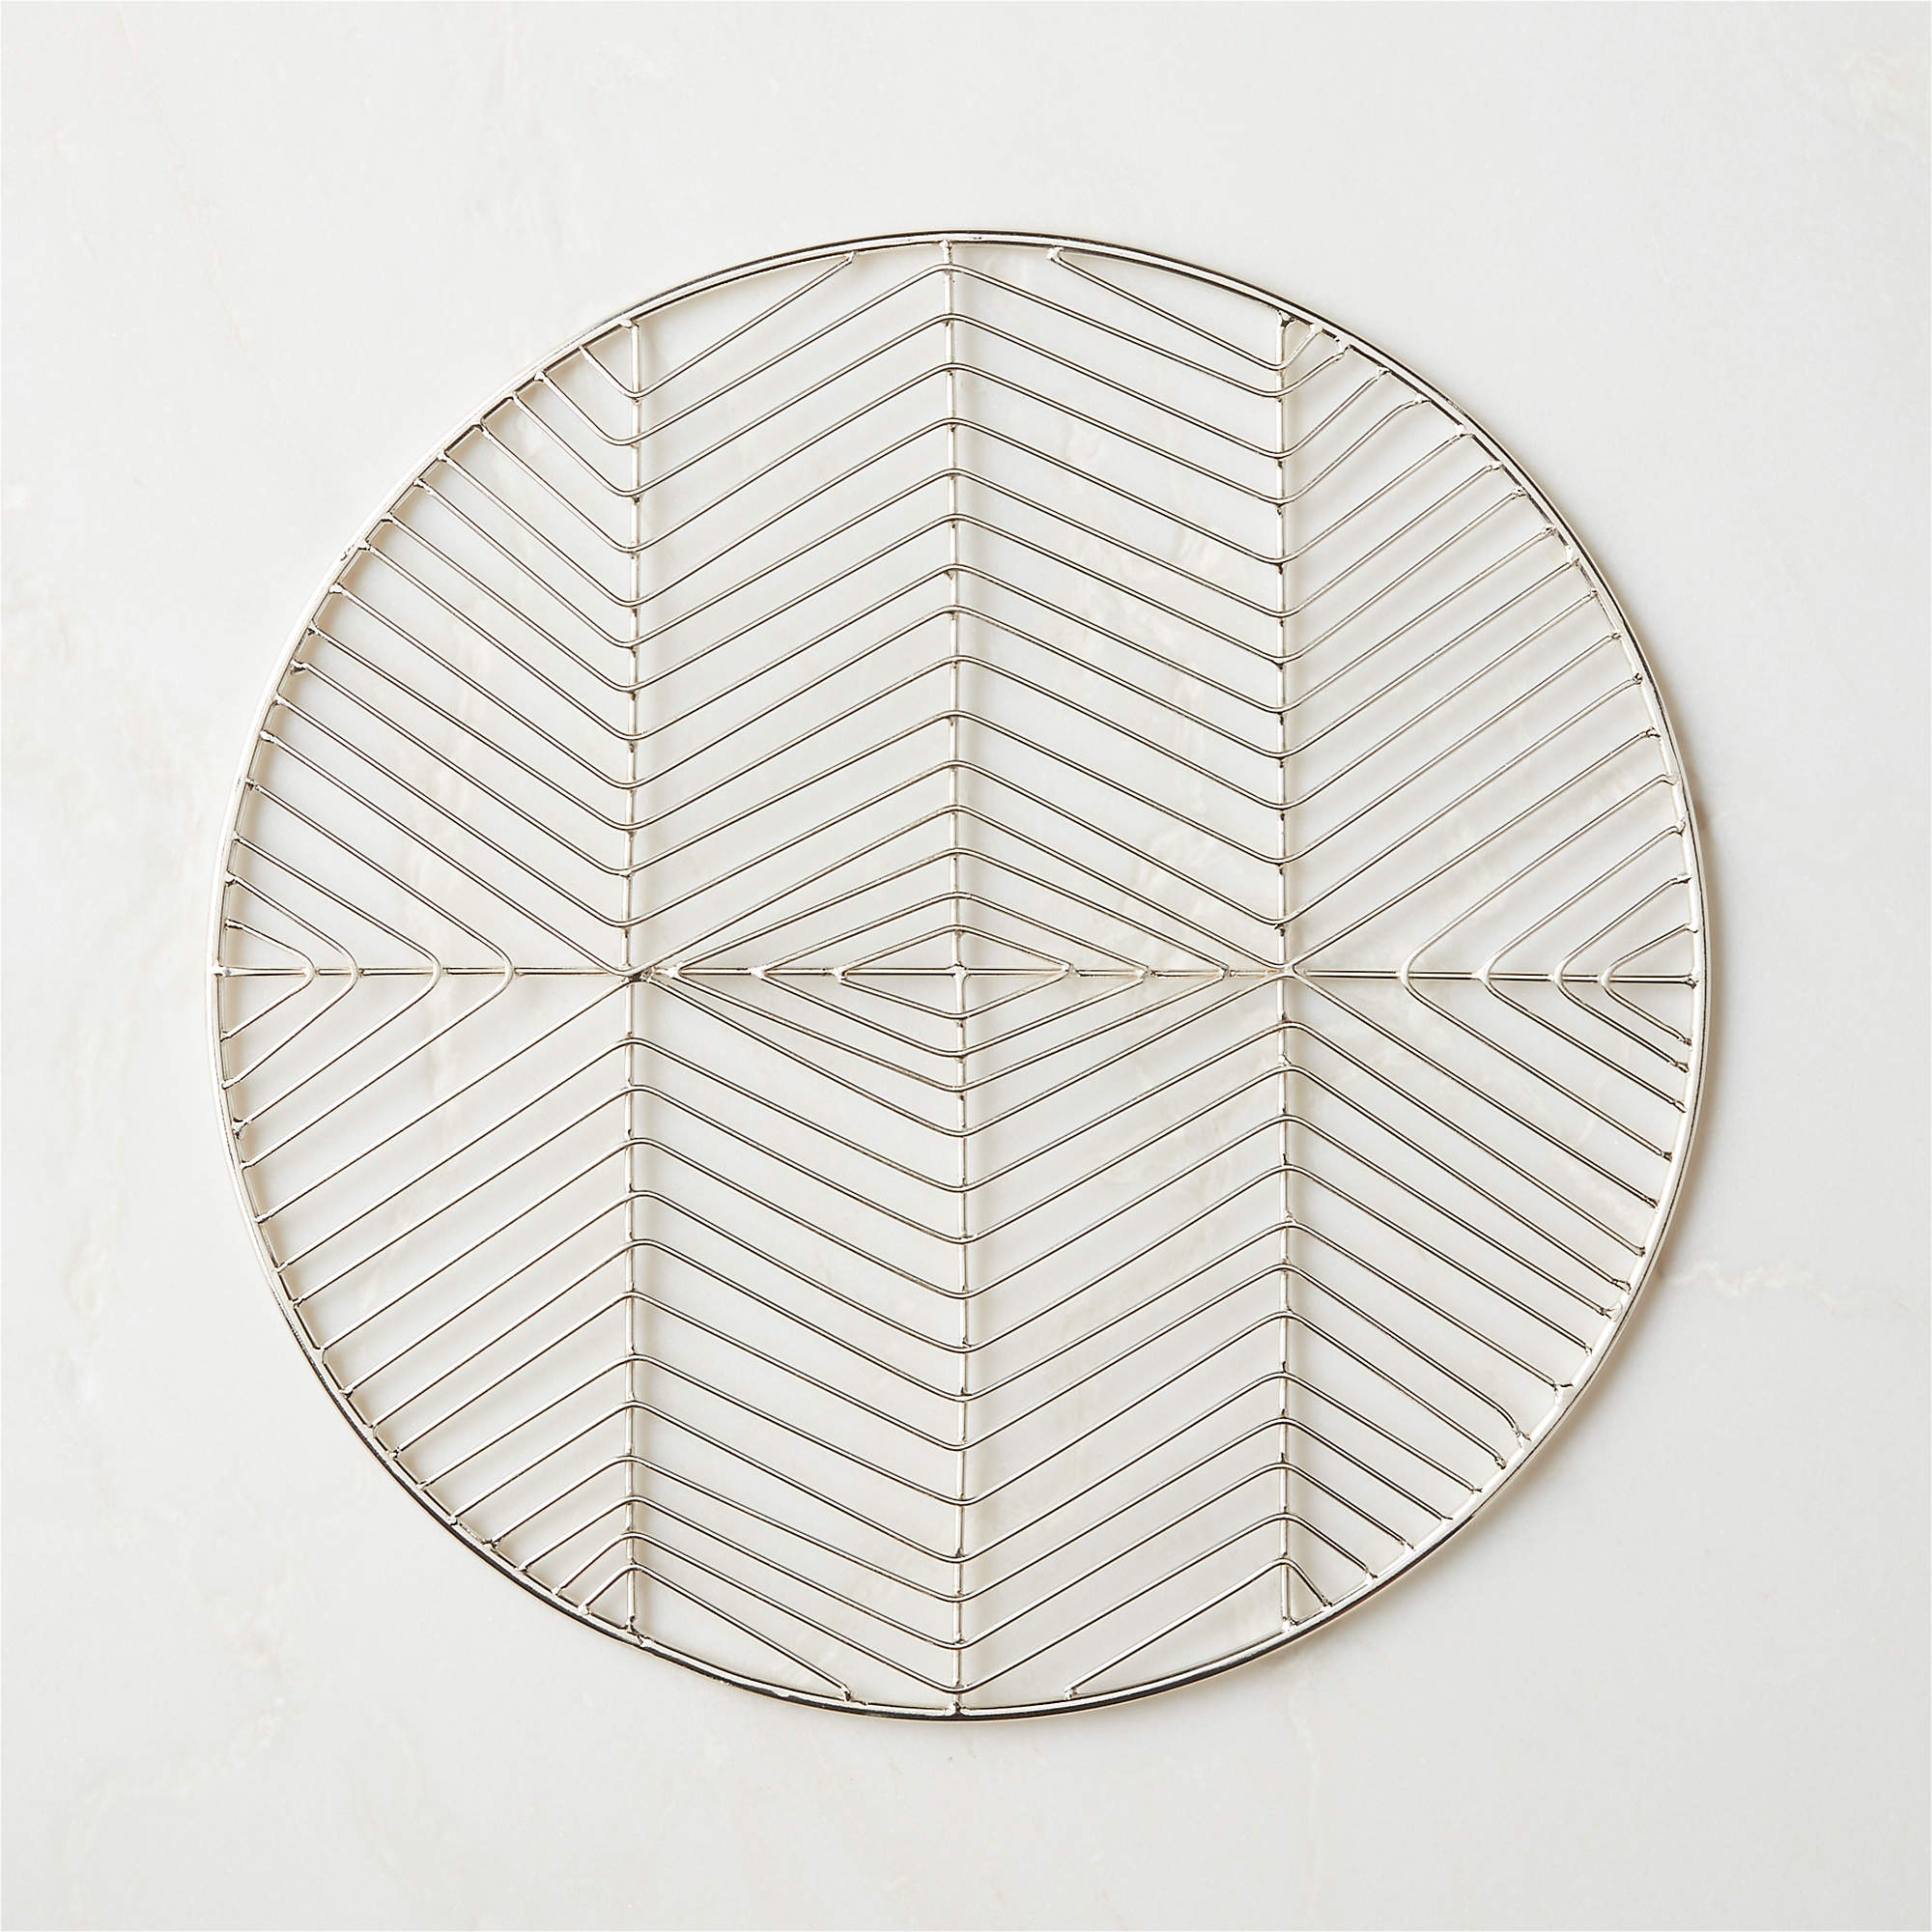 The Best Trivets Are Ones You’ll Want to Leave Out on Your Countertop 24/7